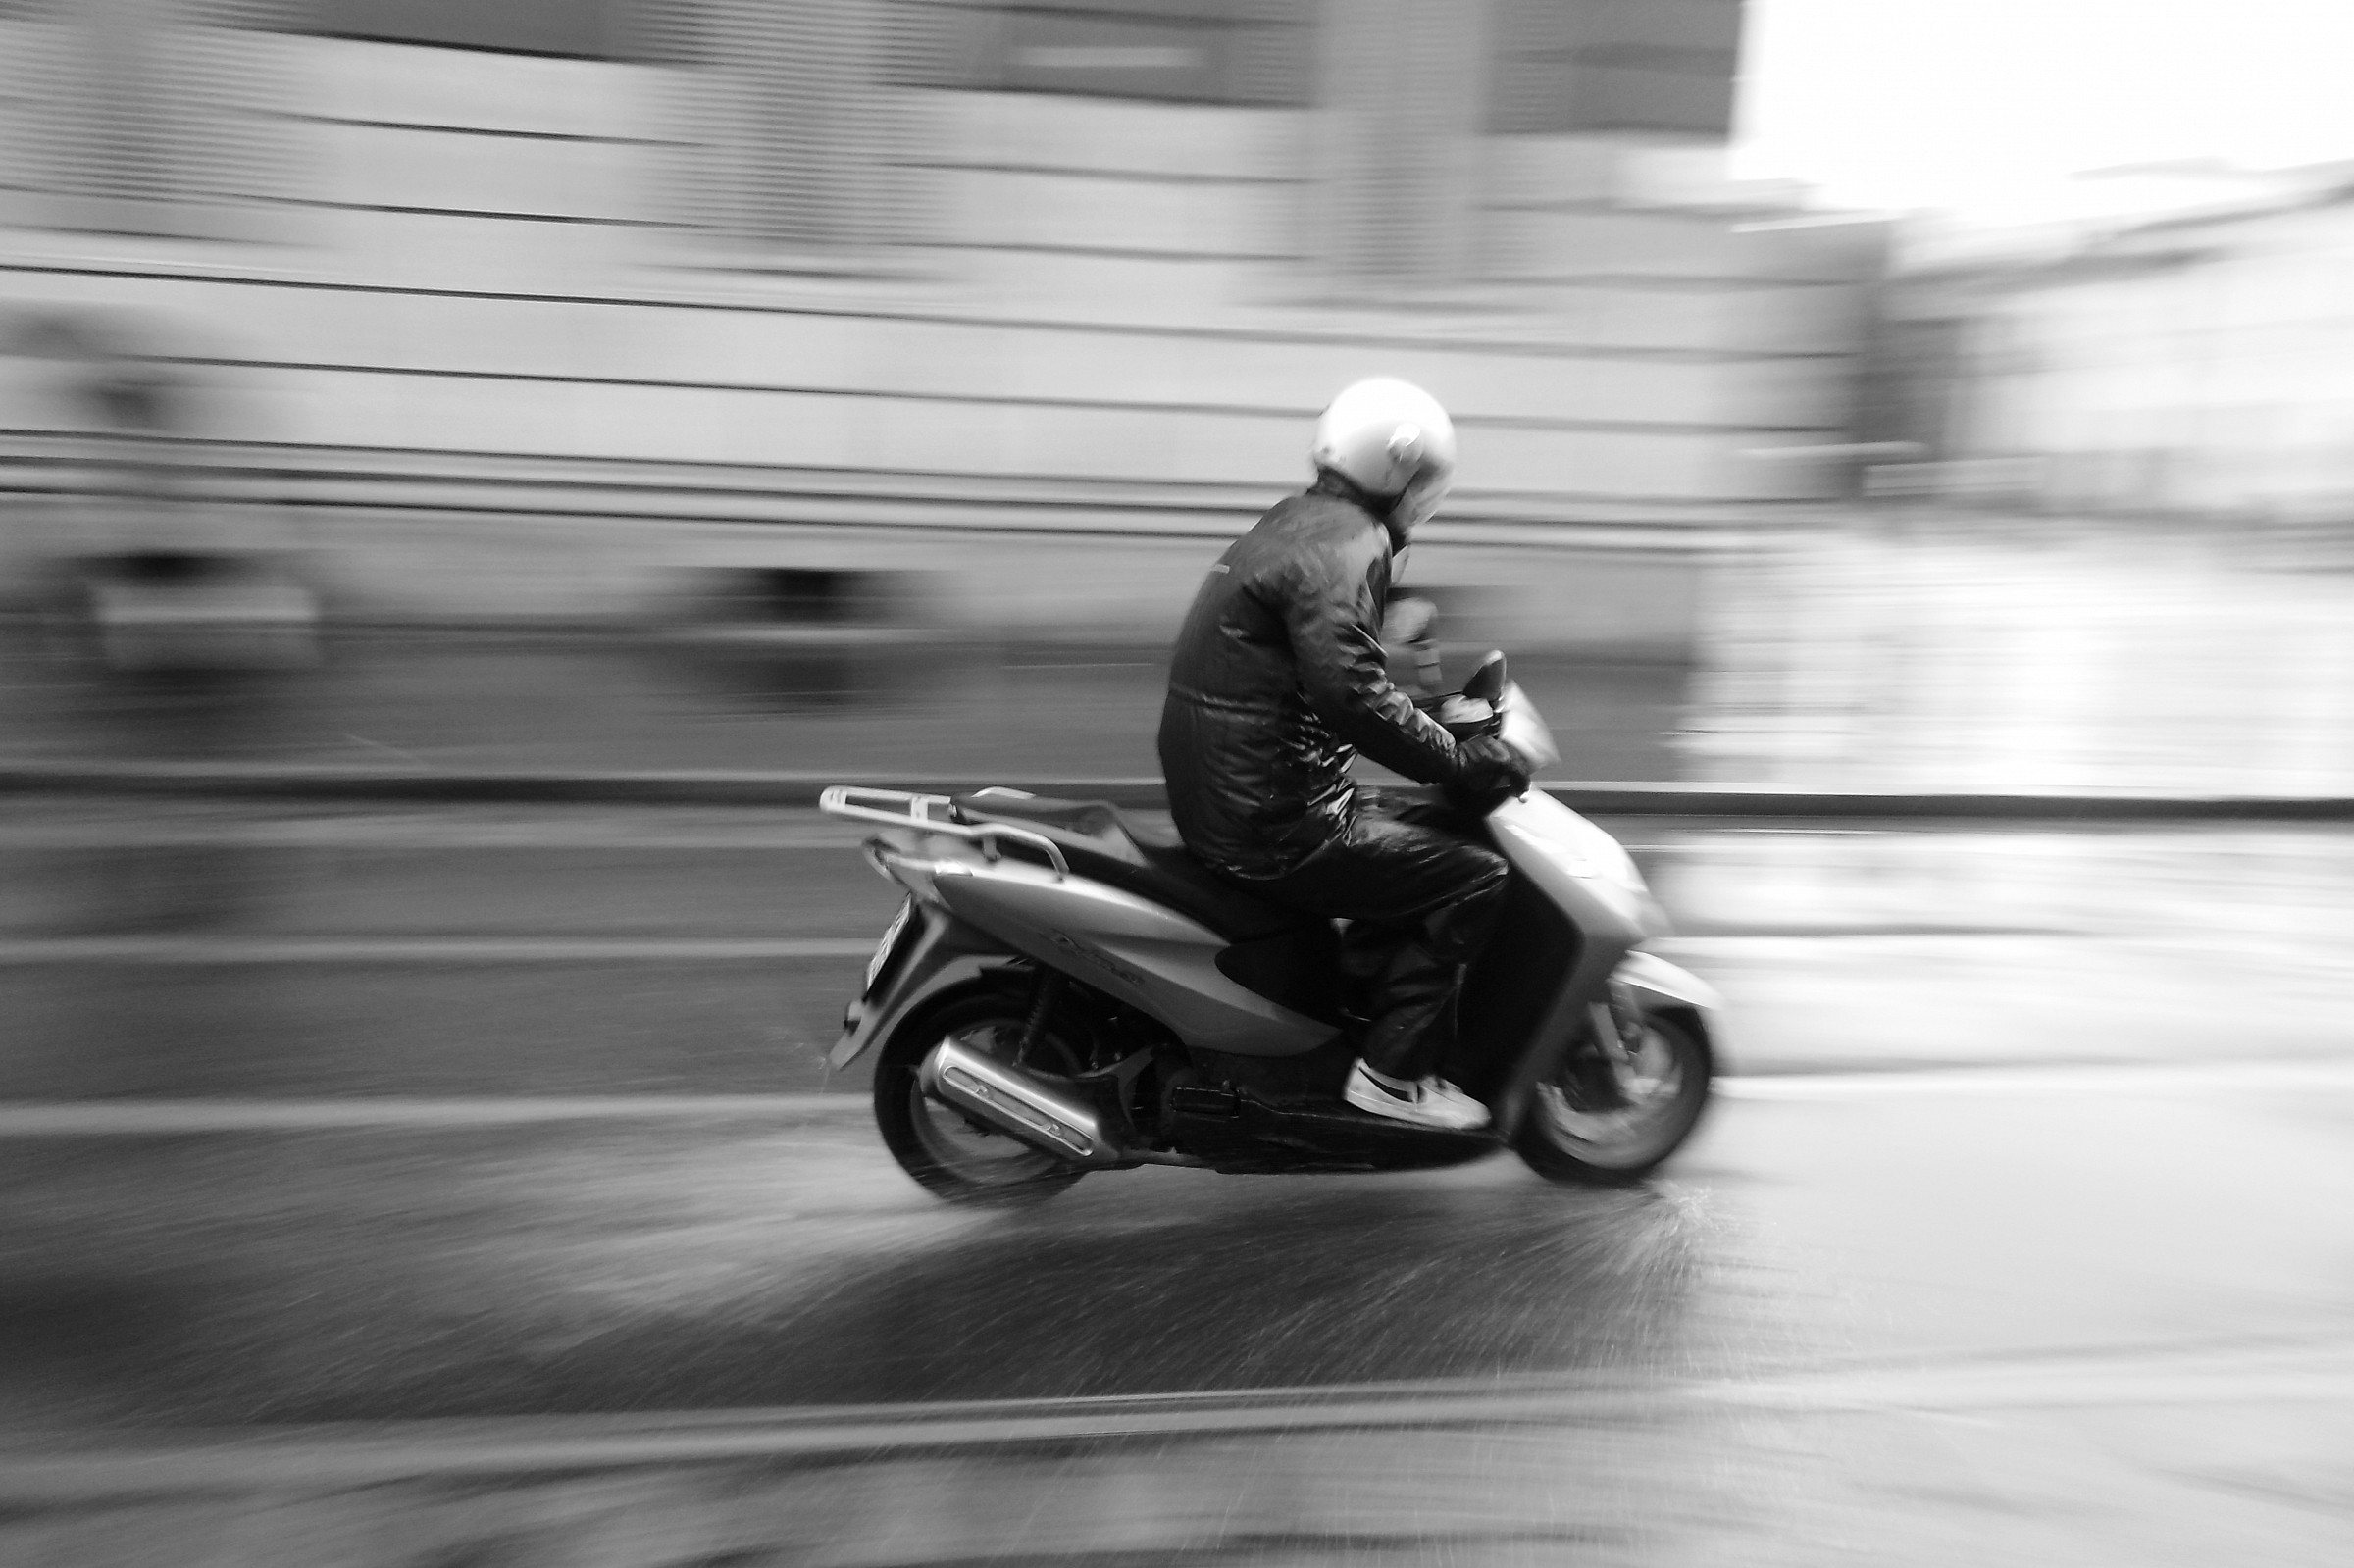 Panning with compact camera...